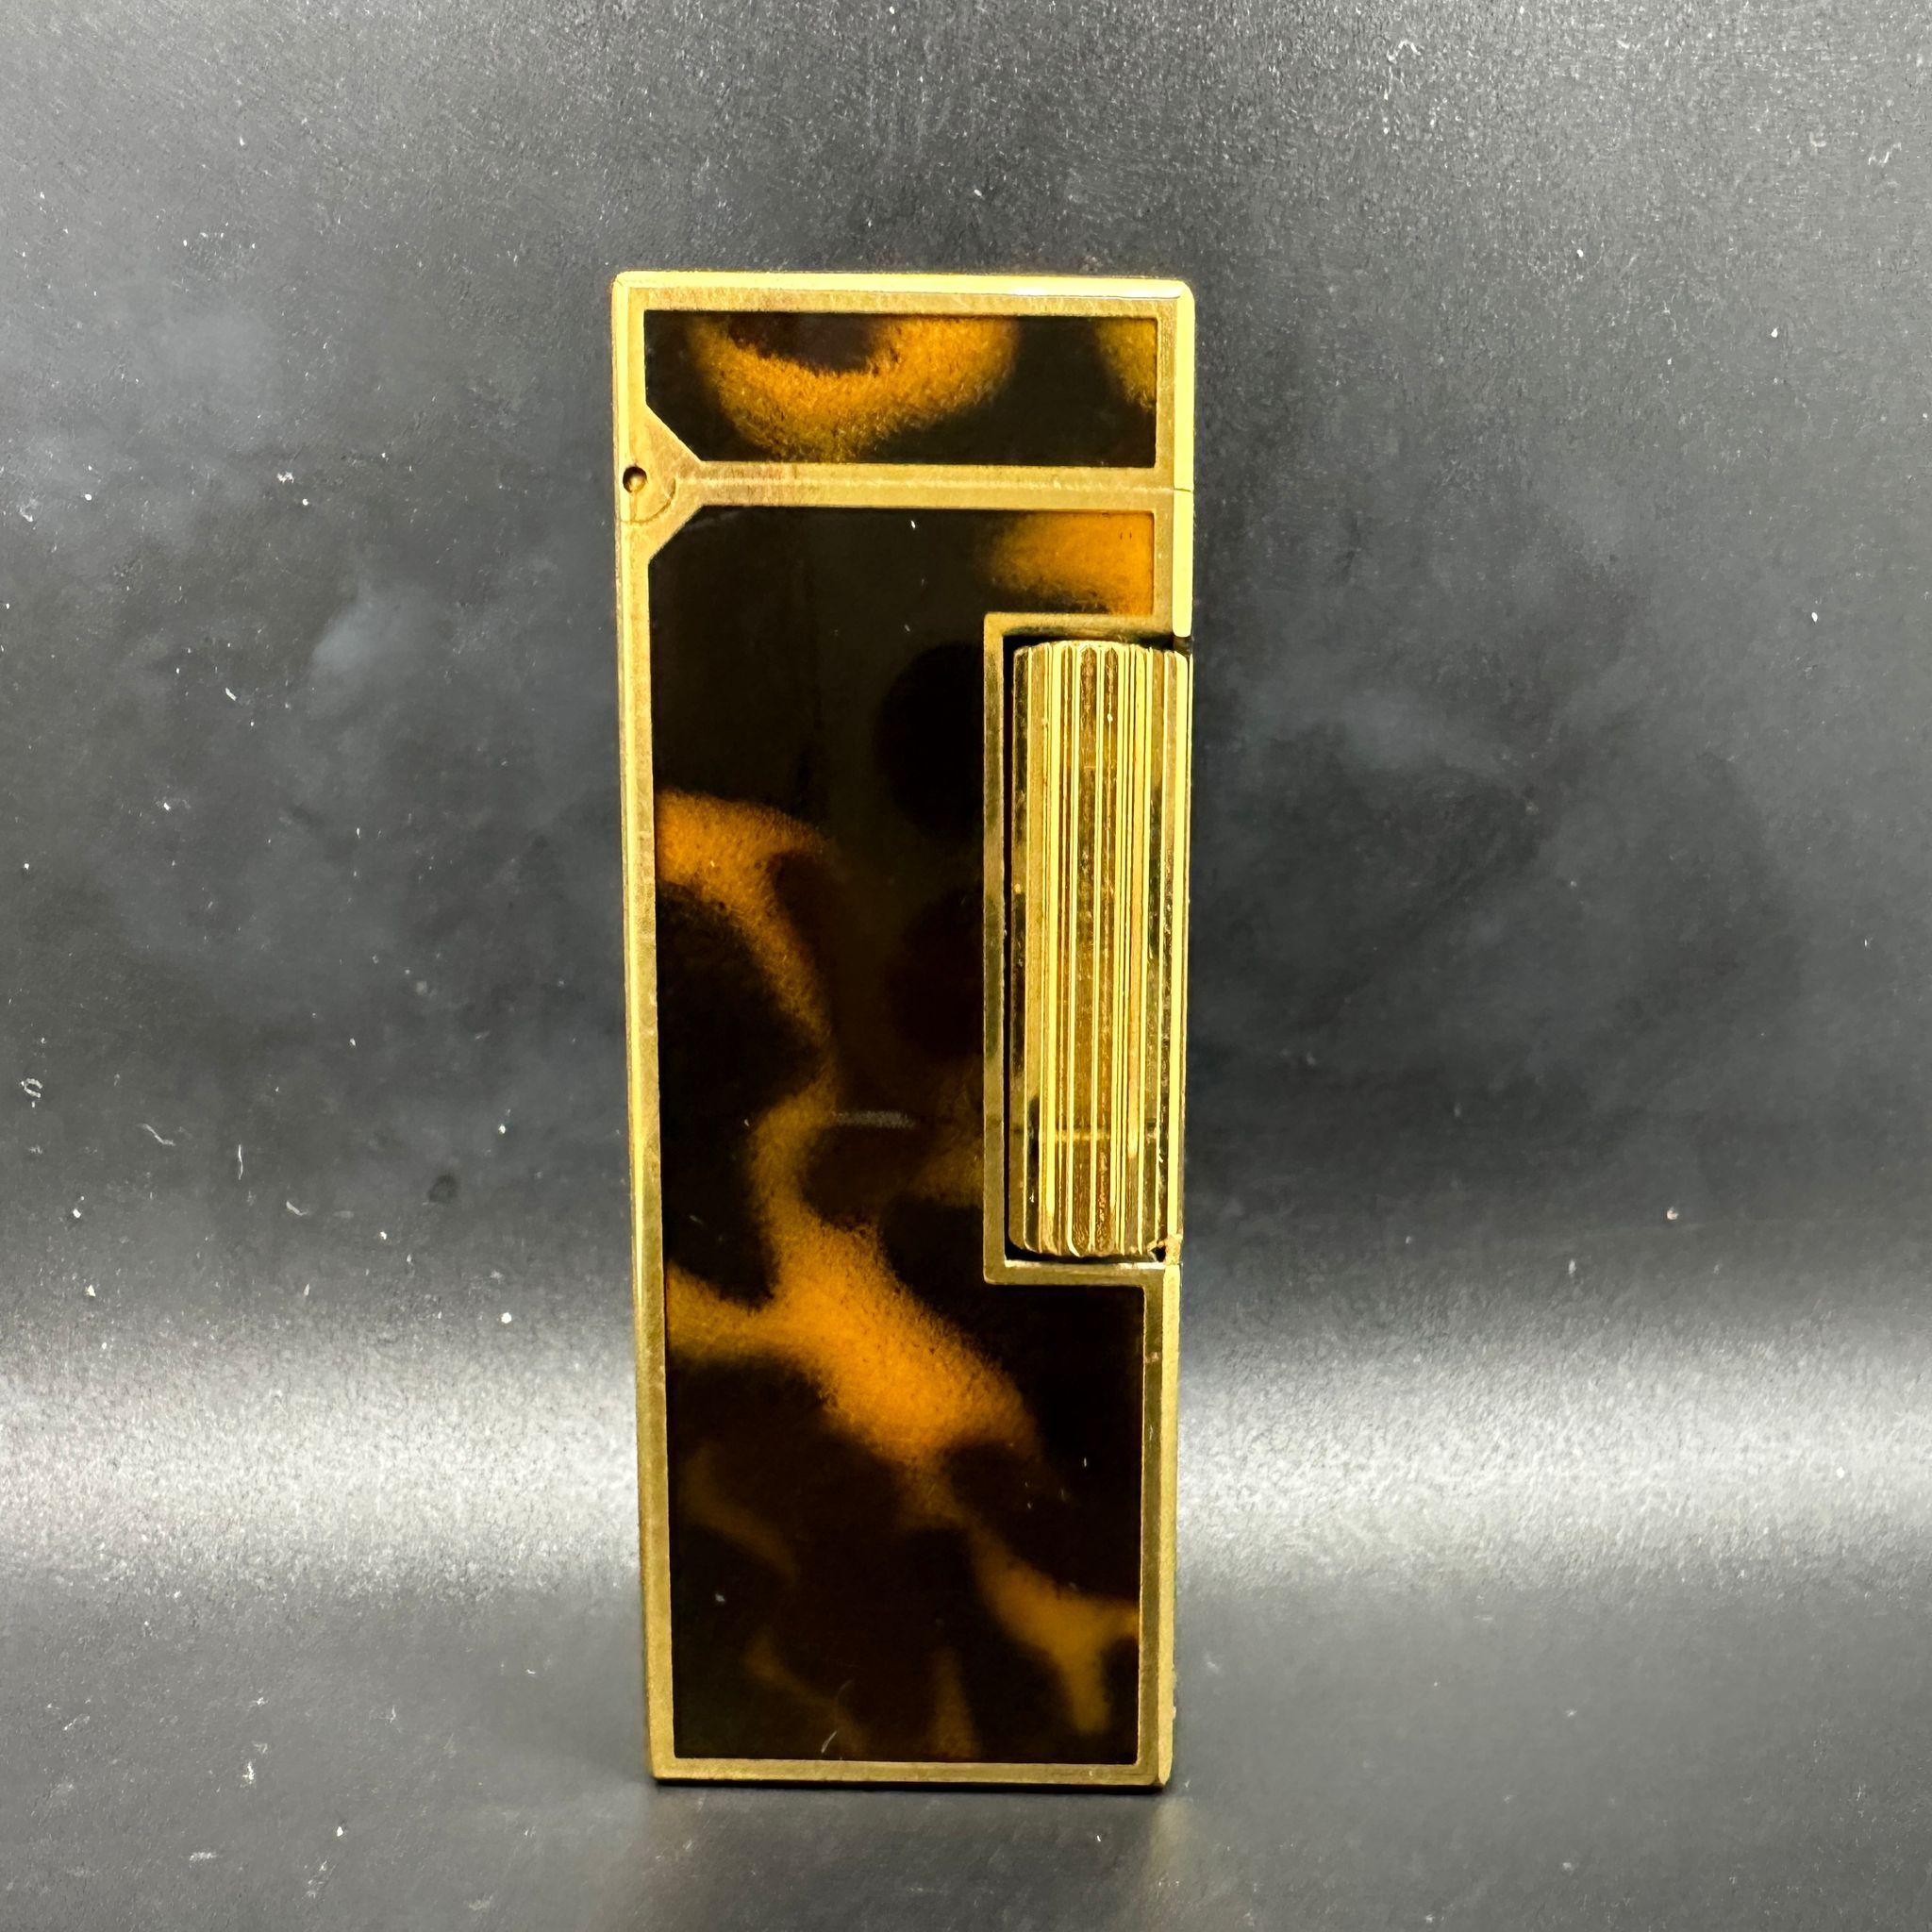 1980 Dunhill Gold Tone and Tortoiseshell Resin Rollagas Lighter
Circa 1980
Alfred Dunhill made lighter
Original Dunhill box and papers 
Chocolate velvet interior 
The lighter sparks, ignites and flames 
Retro and Rare 
